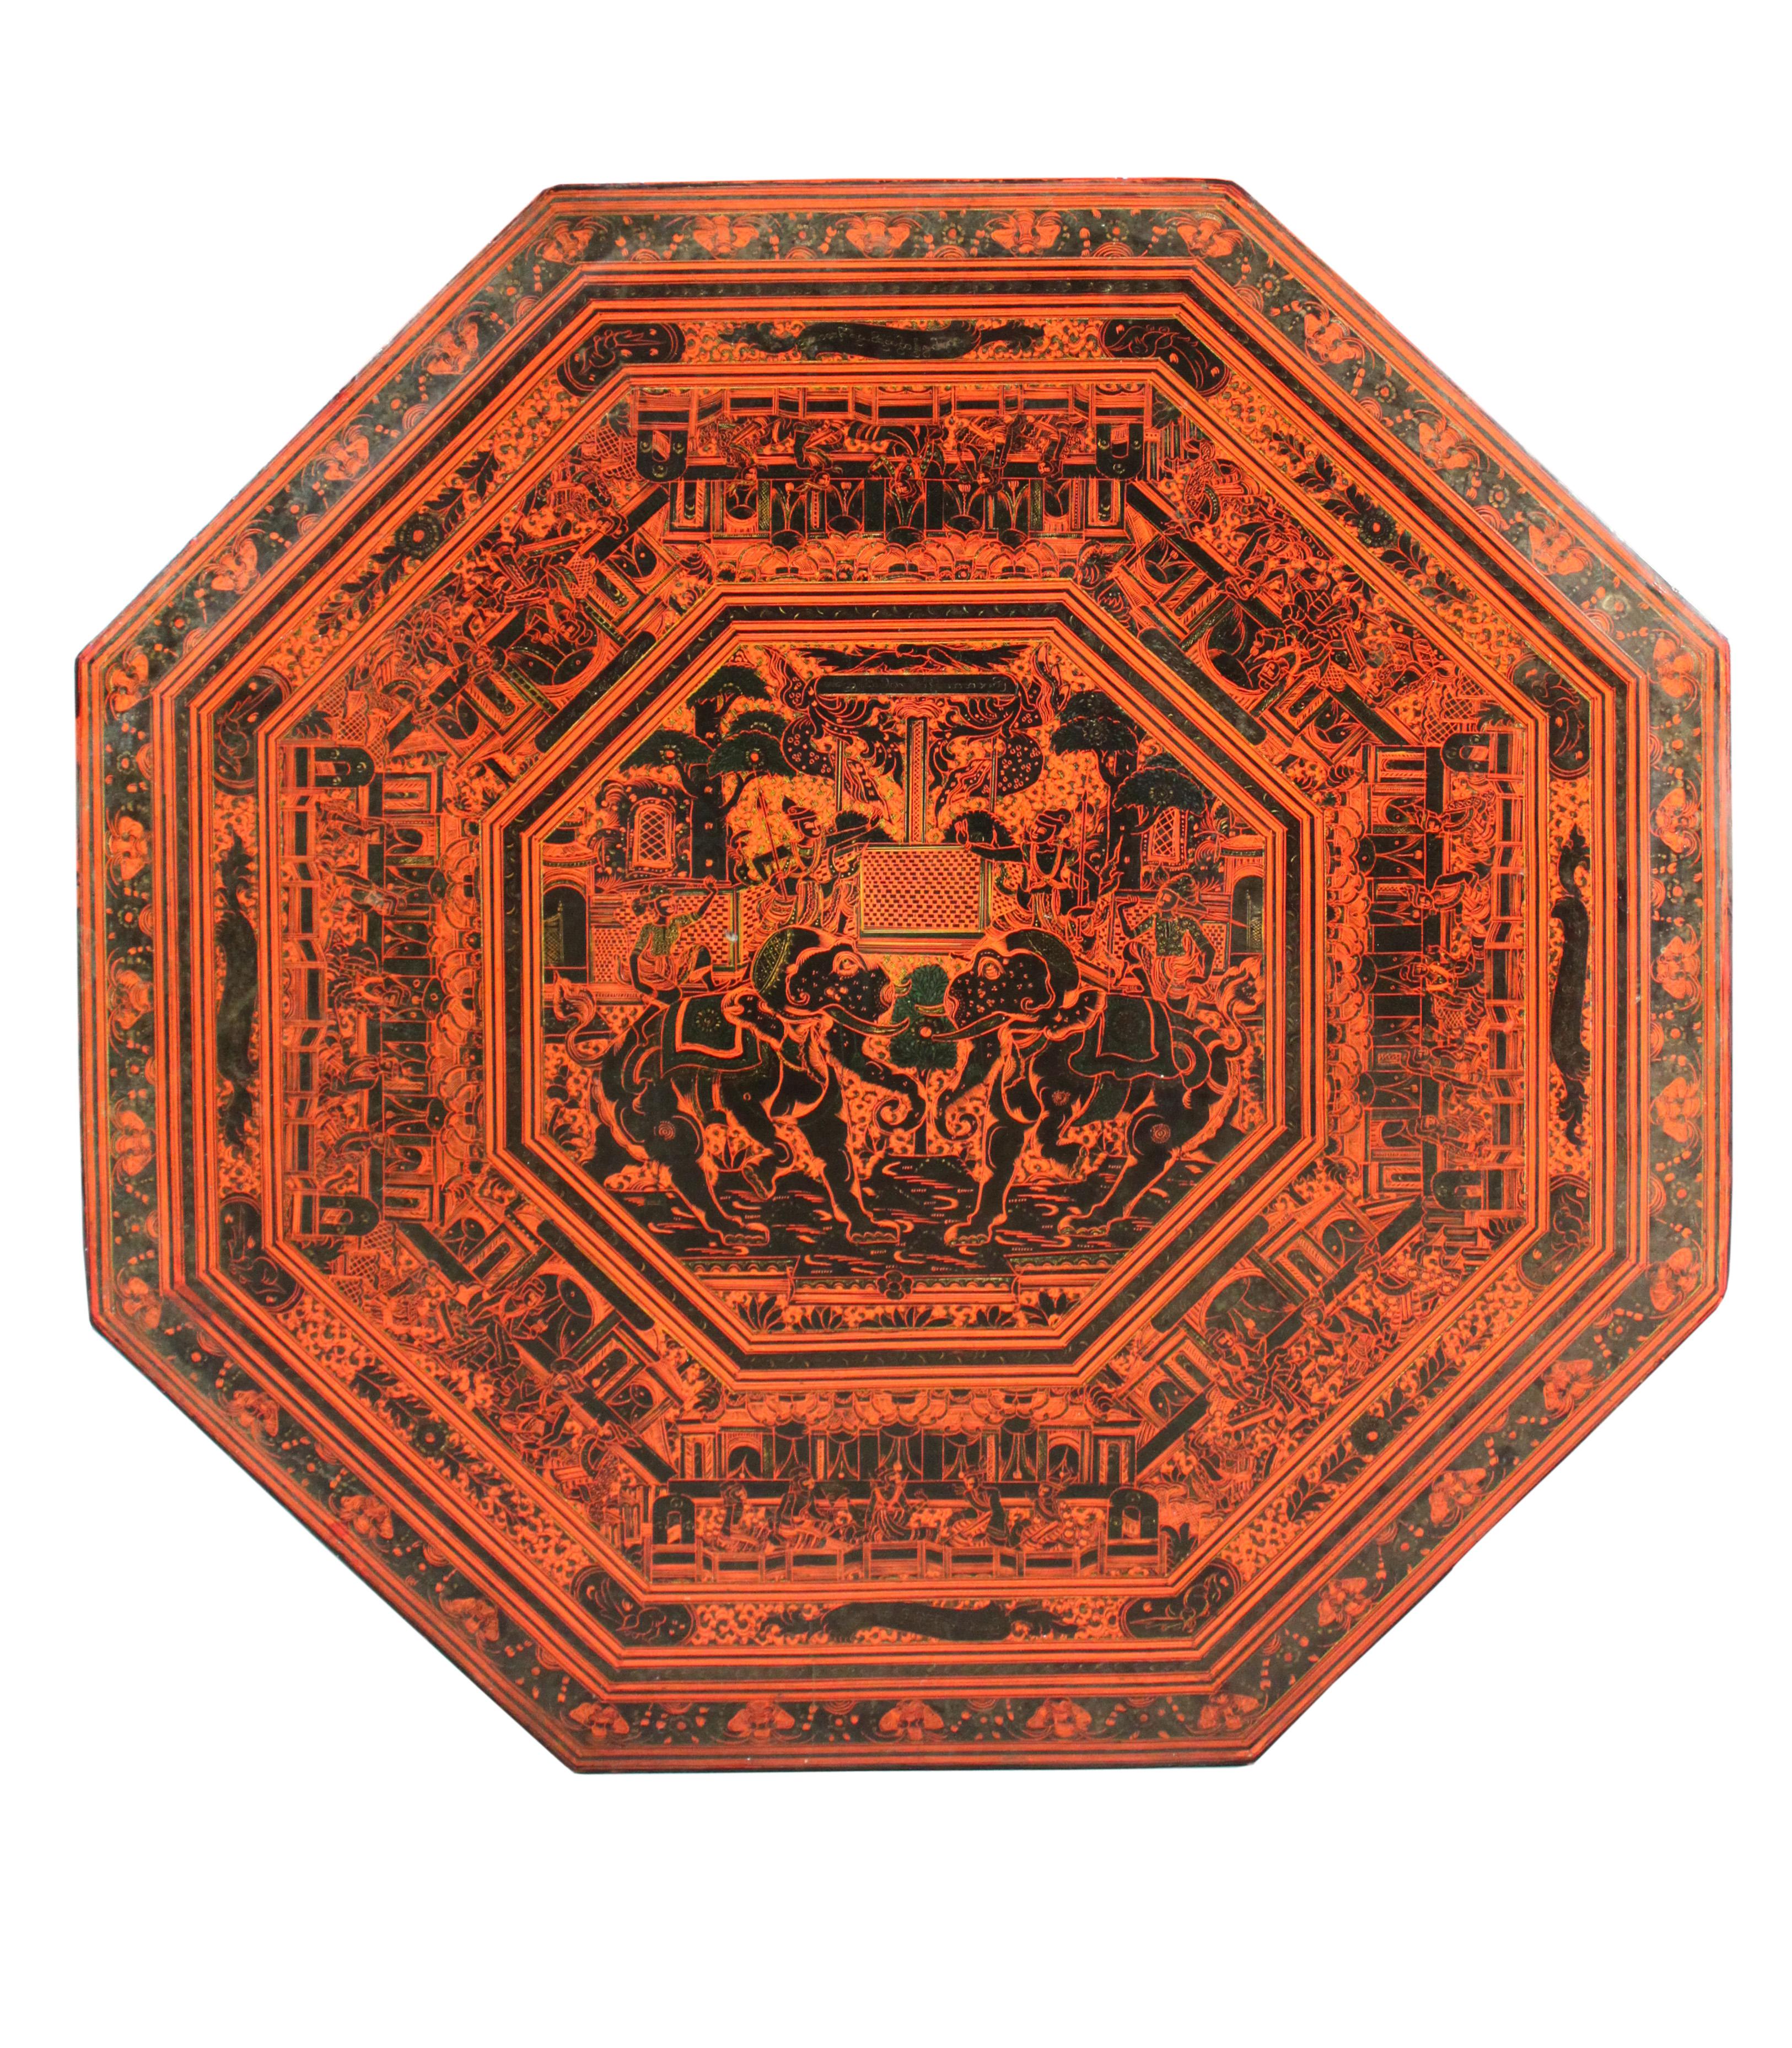 An unusually large Indian red lacquer table; the octagonal top is decorated with prancing elephants surrounded by a frieze of figures and the base has details of lions, elephants and various figures.
The top removes and the base folds up.

 